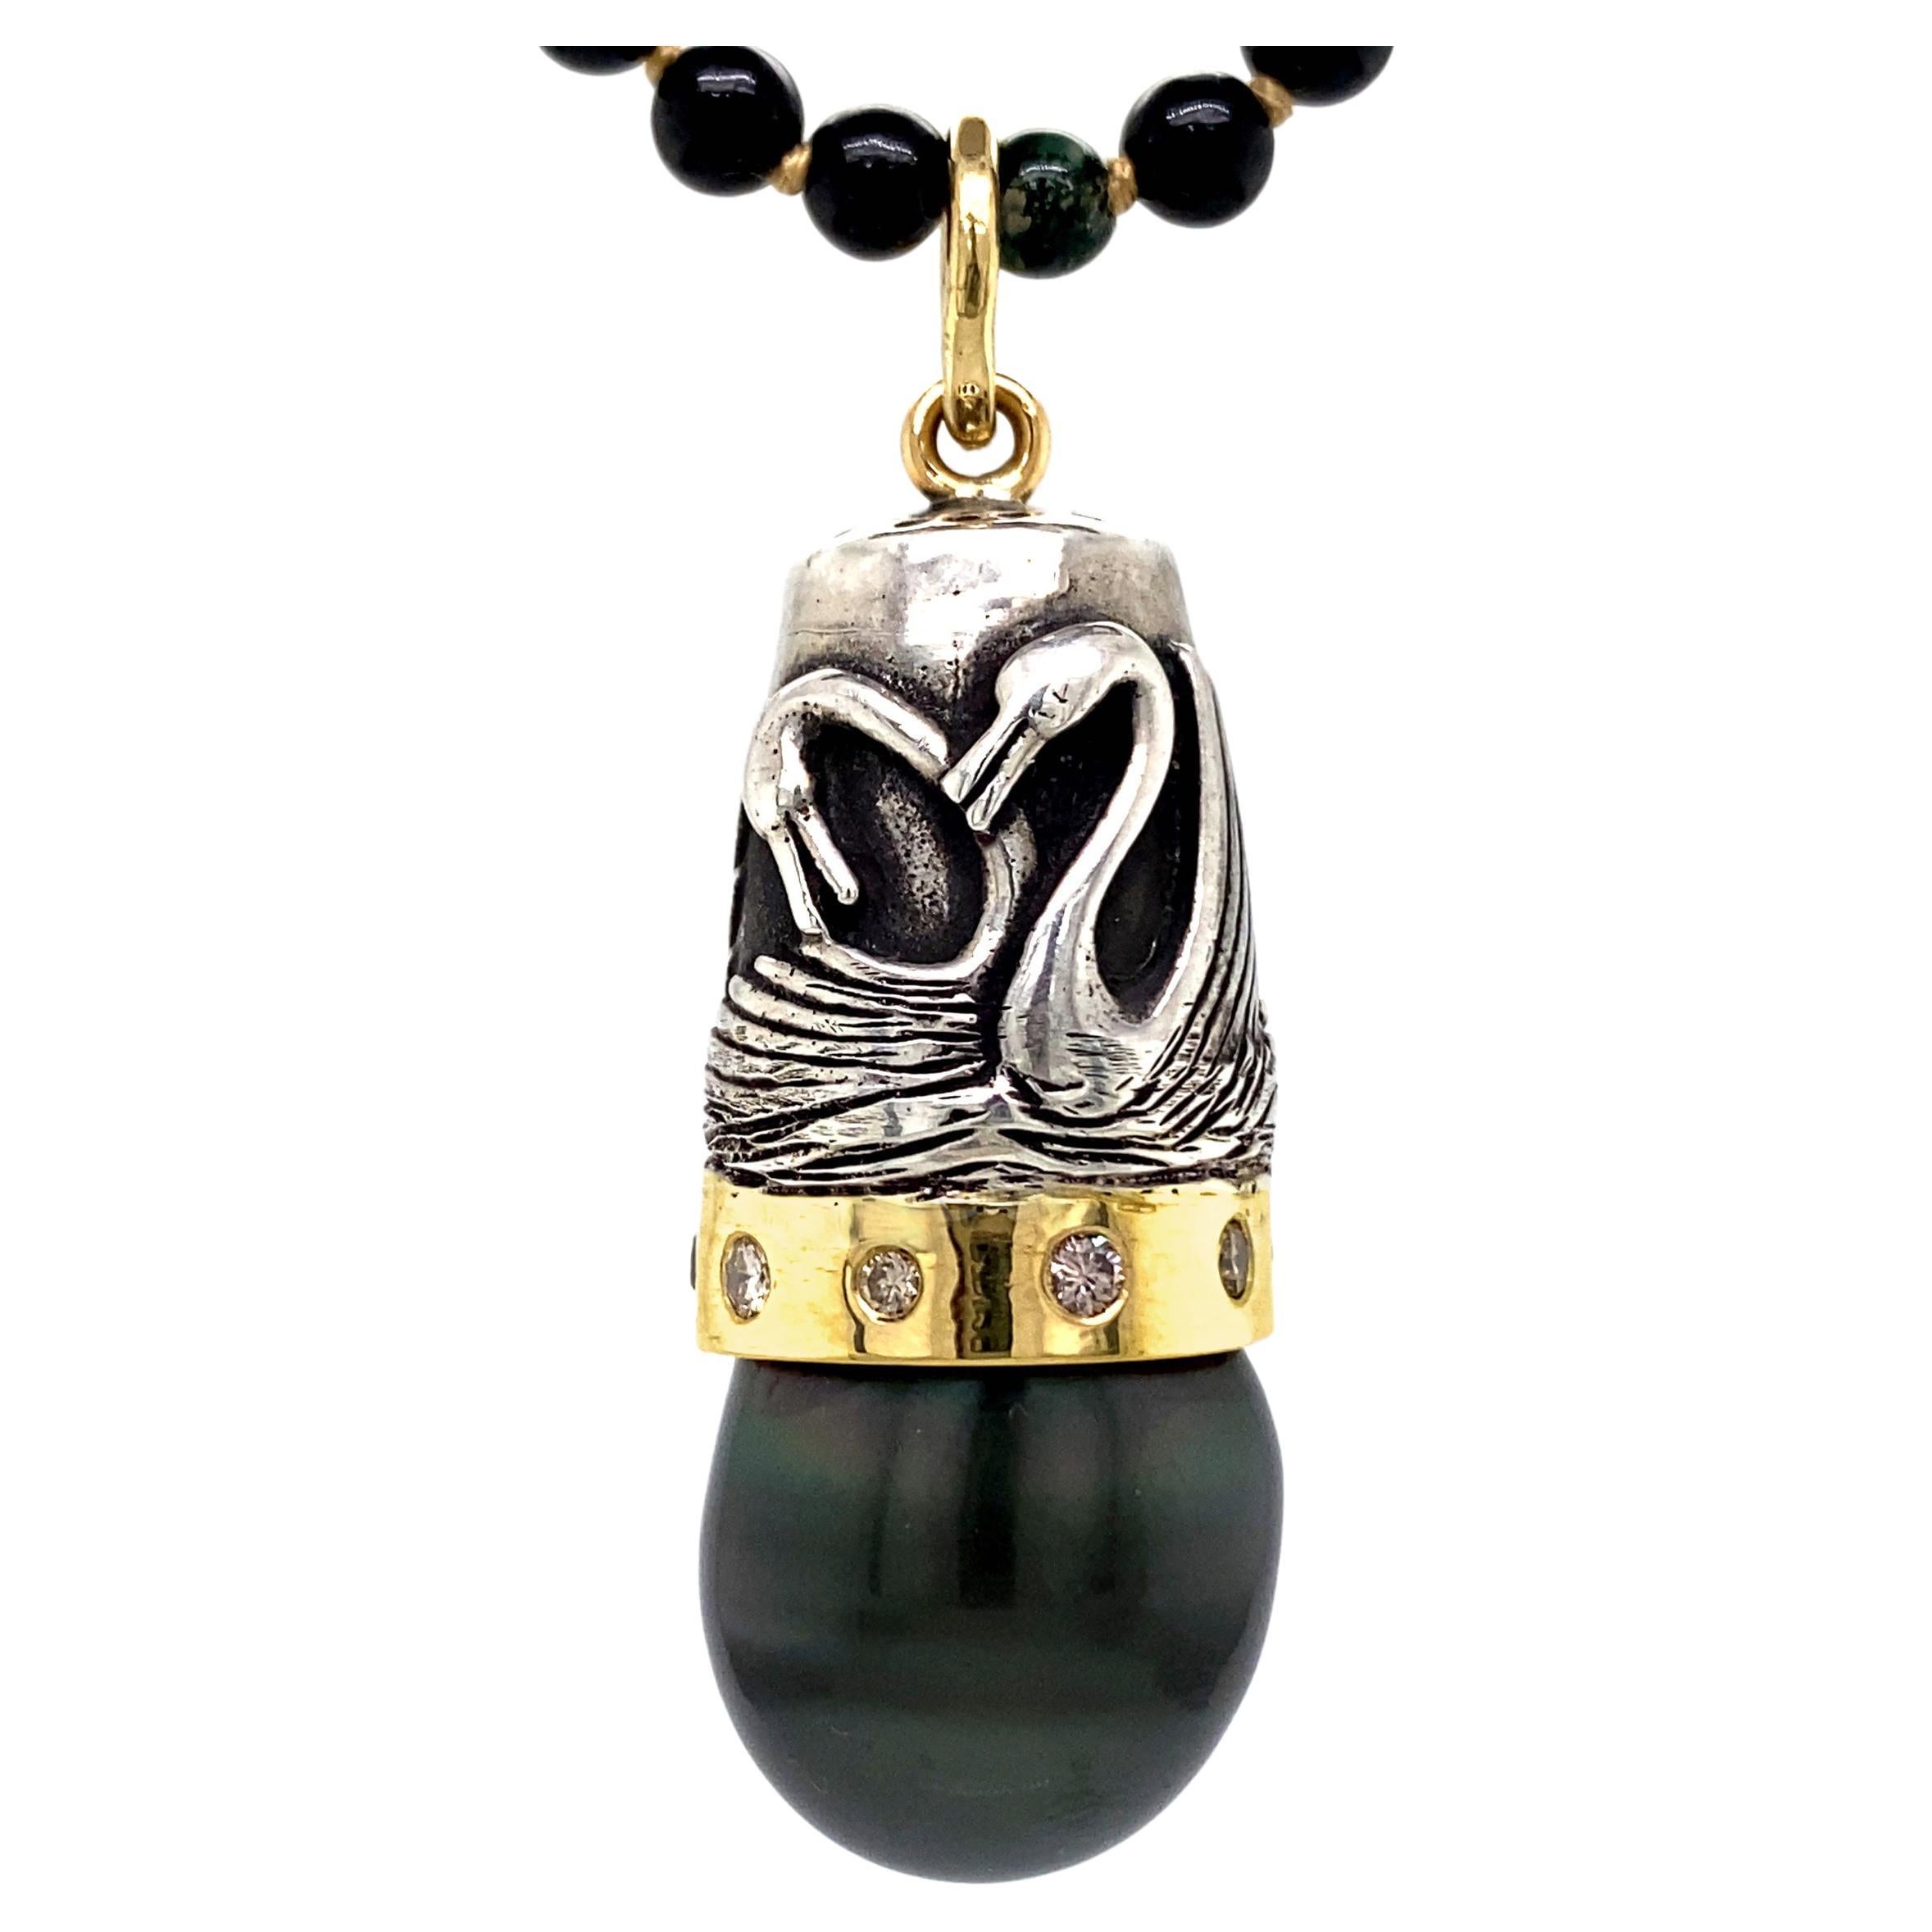 Tahitian Pearl Fob with 18K Gold & Diamond Bezel Topped by Sterling Swan Thimble